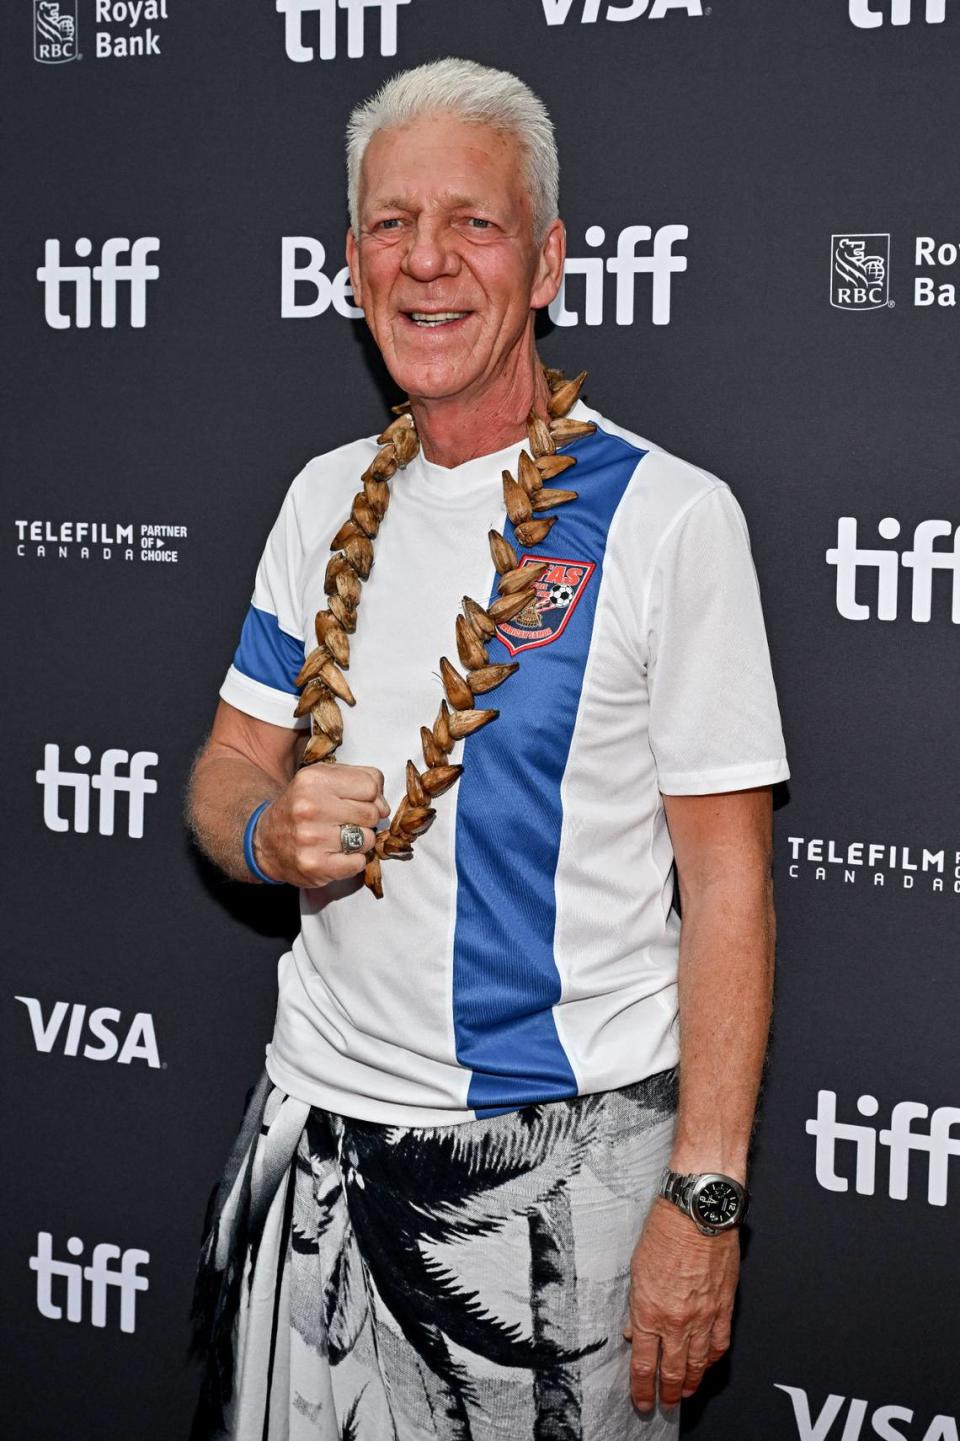 Thomas Rongen attending the premiere of the movie Next Goal Wins during Toronto International Film Festival in Toronto, Canada on September 10, 2023. Photo by Julien Reynaud/APS-Medias/Abaca/Sipa USA